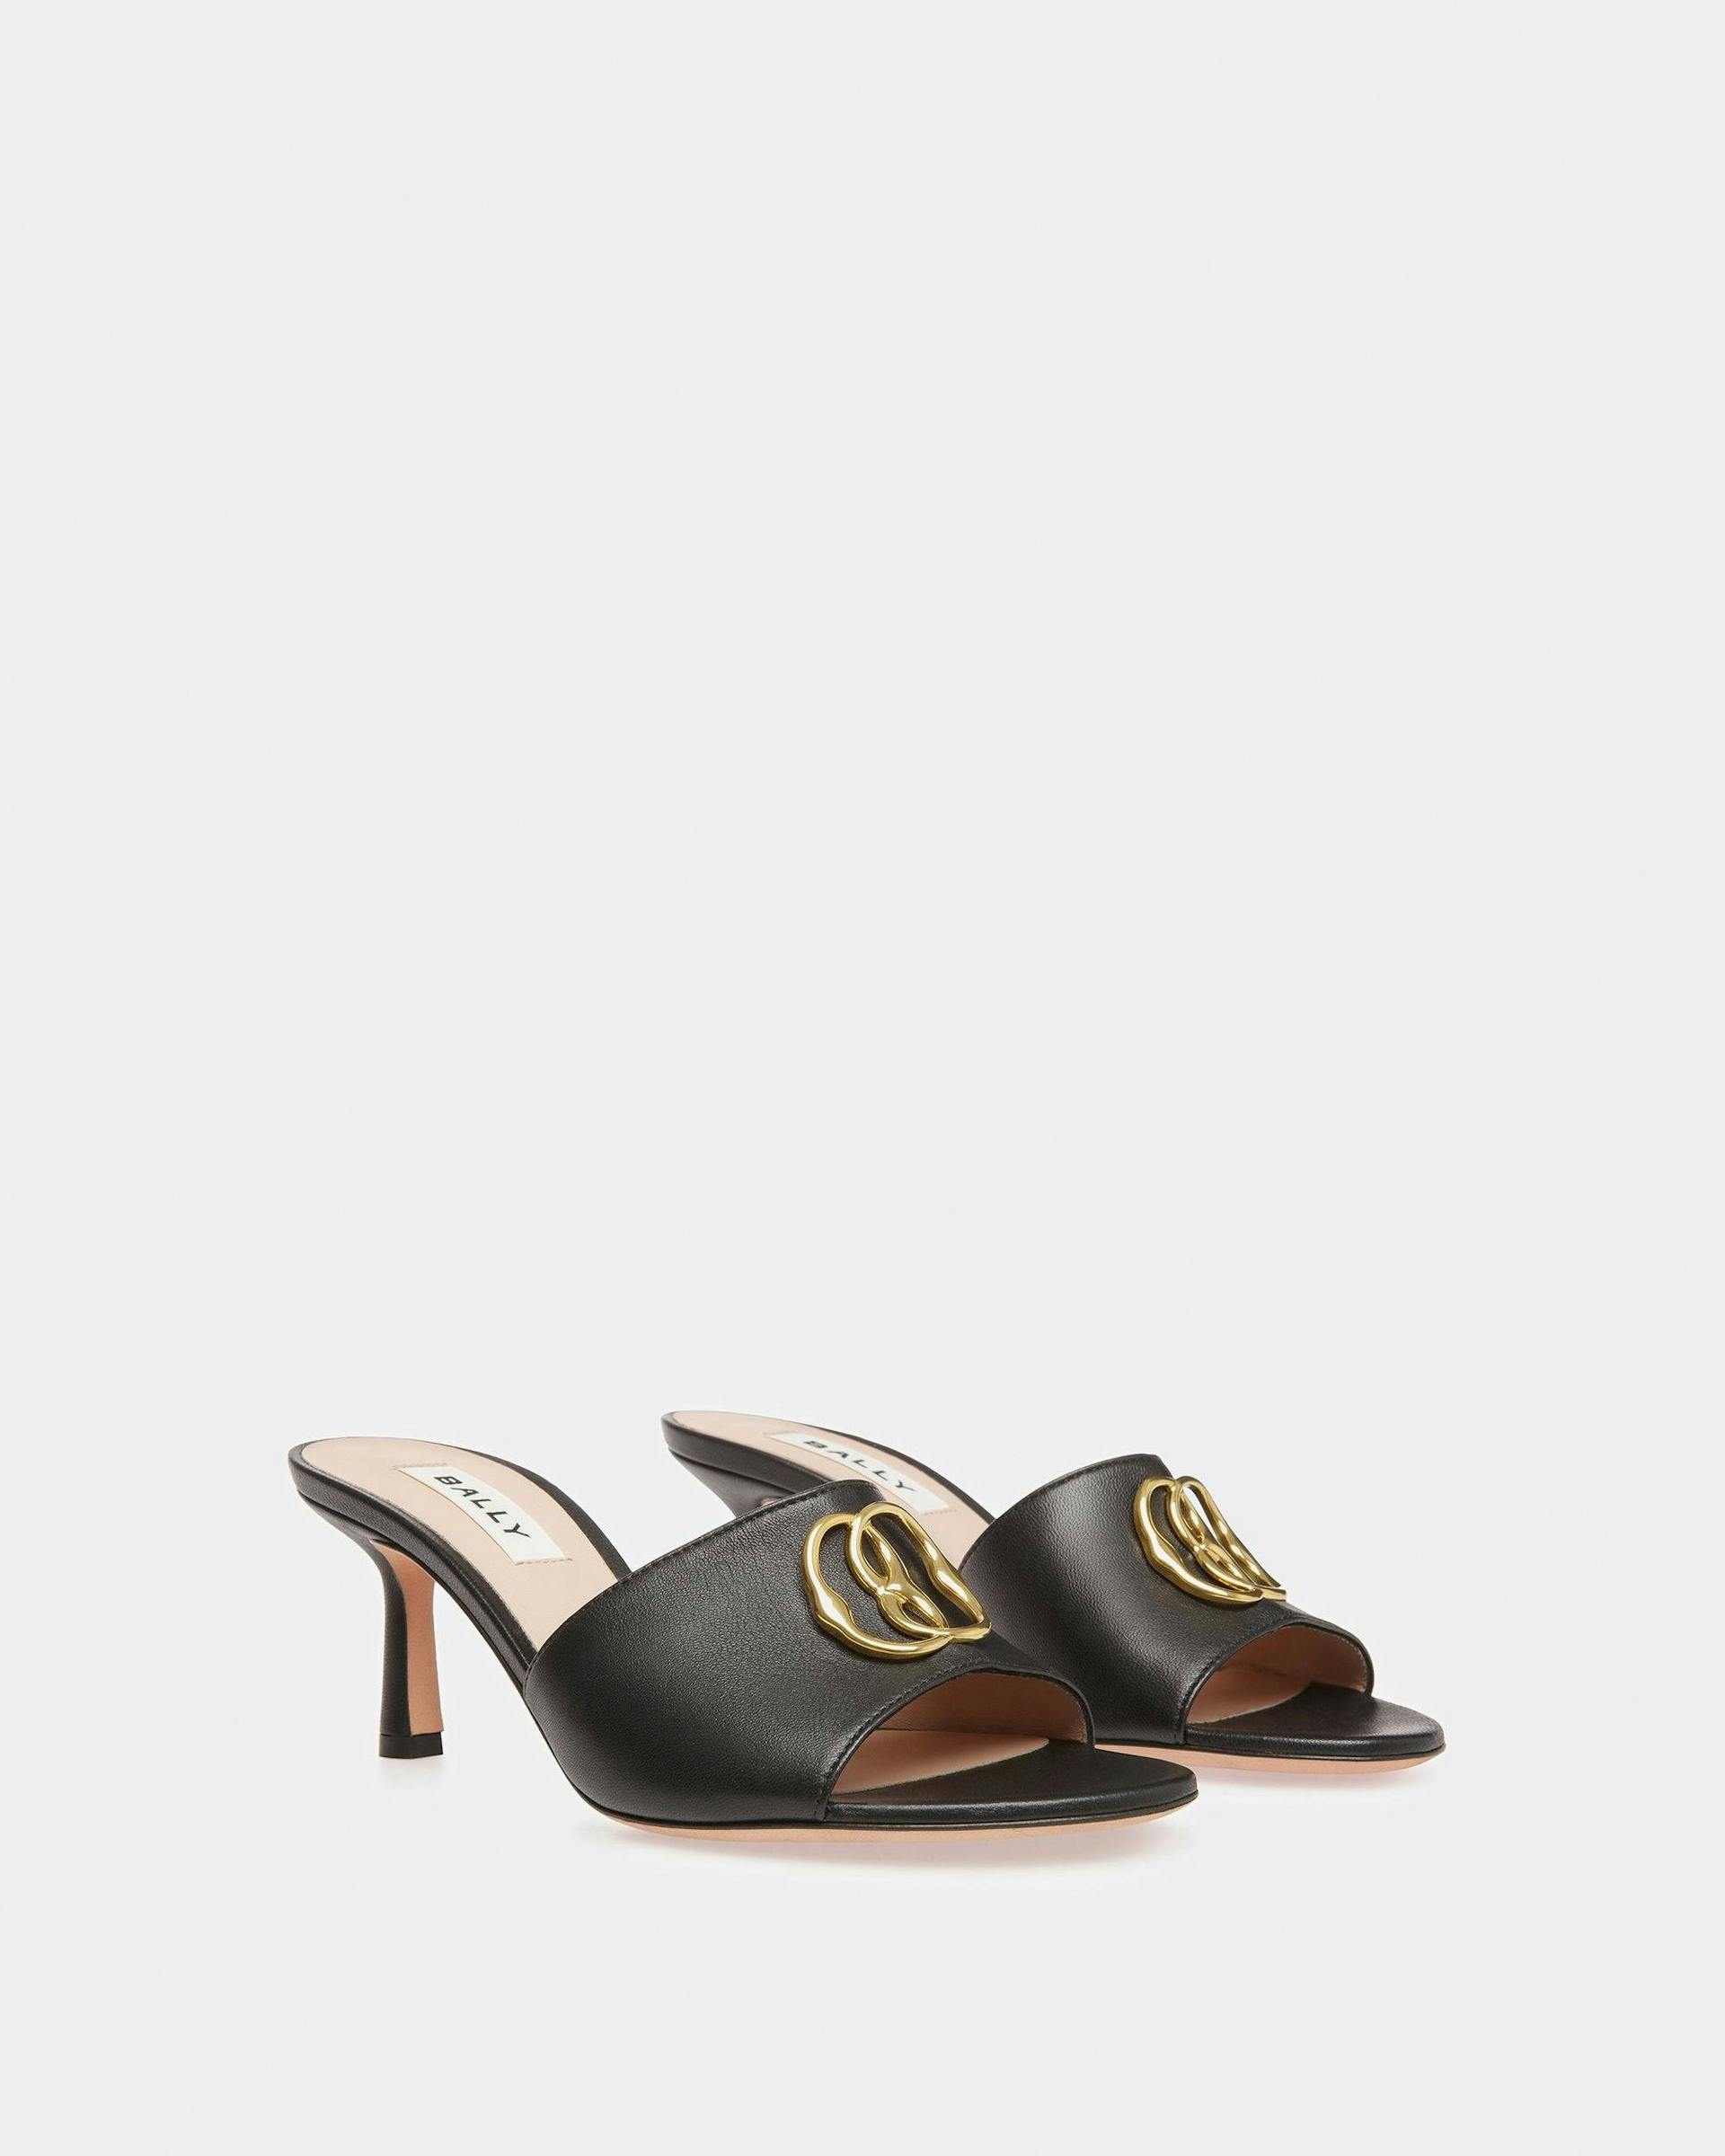 Emblem Sandals In Black Leather - Women's - Bally - 02